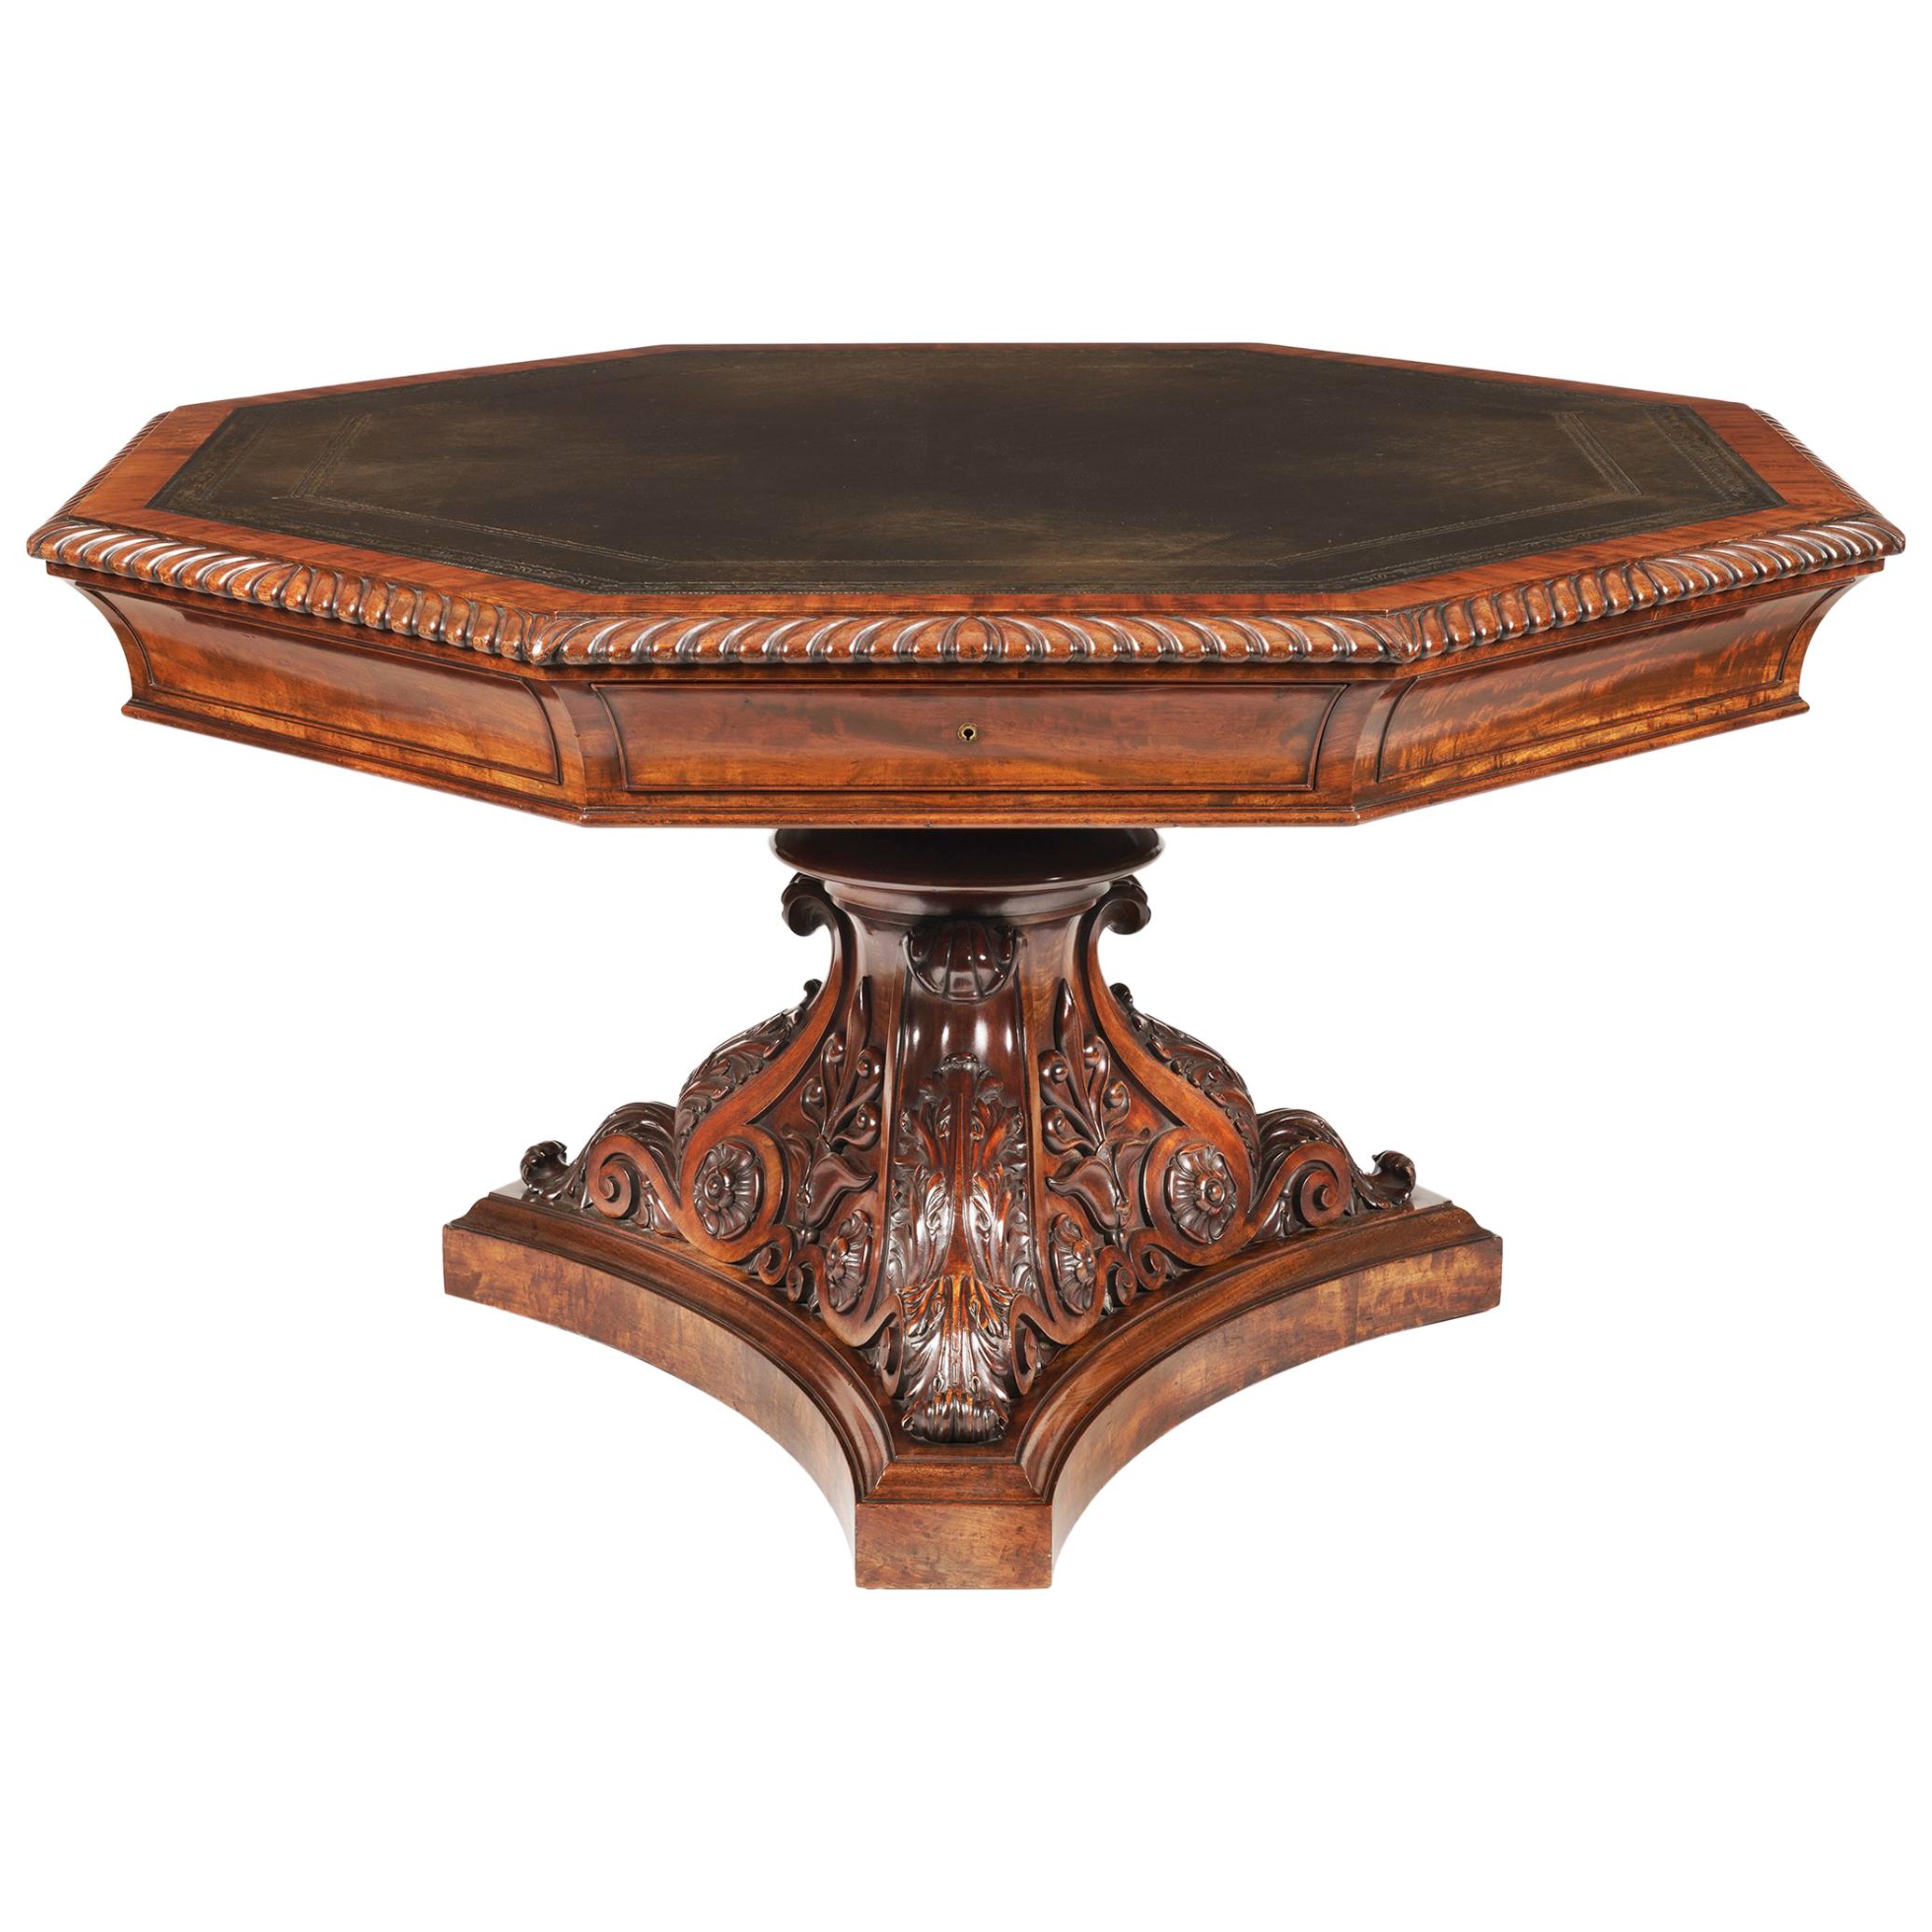 A Mid-Nineteenth Century Octagonal Library Table